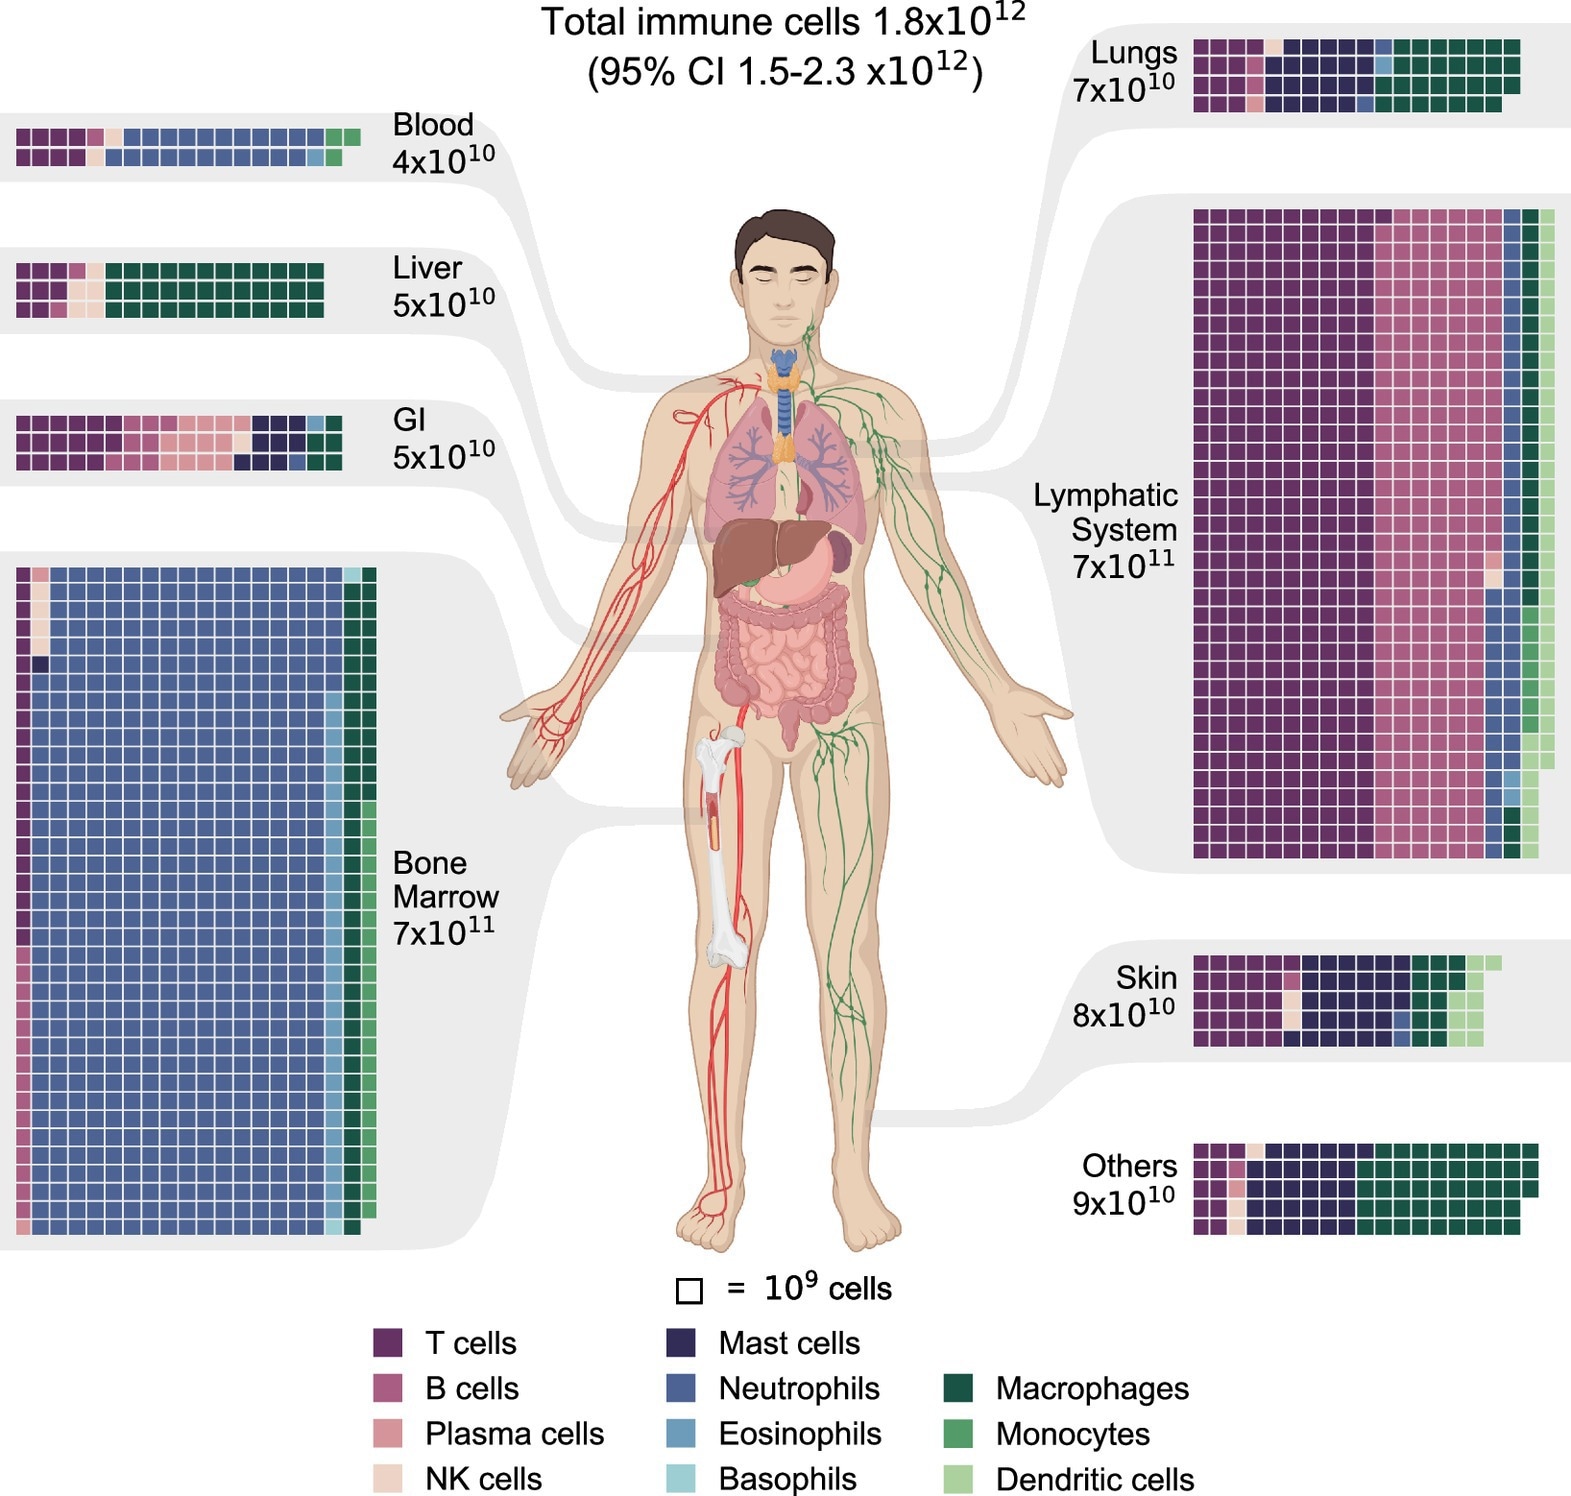 The distribution of immune cells in the human body. Estimates of immune cell populations by cell type and tissue grouped by primary tissues and systems. The tissues are displayed via a chart of the human body. A waffle chart depicts the distribution of immune cells in each tissue, with each square representing a population of 109 cells. To facilitate the presentation, the populations were rounded to multiples of 109. The total population of each tissue is shown with one significant digit. Throughout all the figures, cell types are color-coded for ease of reference. GI = gastrointestinal tract. Other tissues and organs include the brain, heart, adipose tissue, skeletal muscles, kidneys, etc.